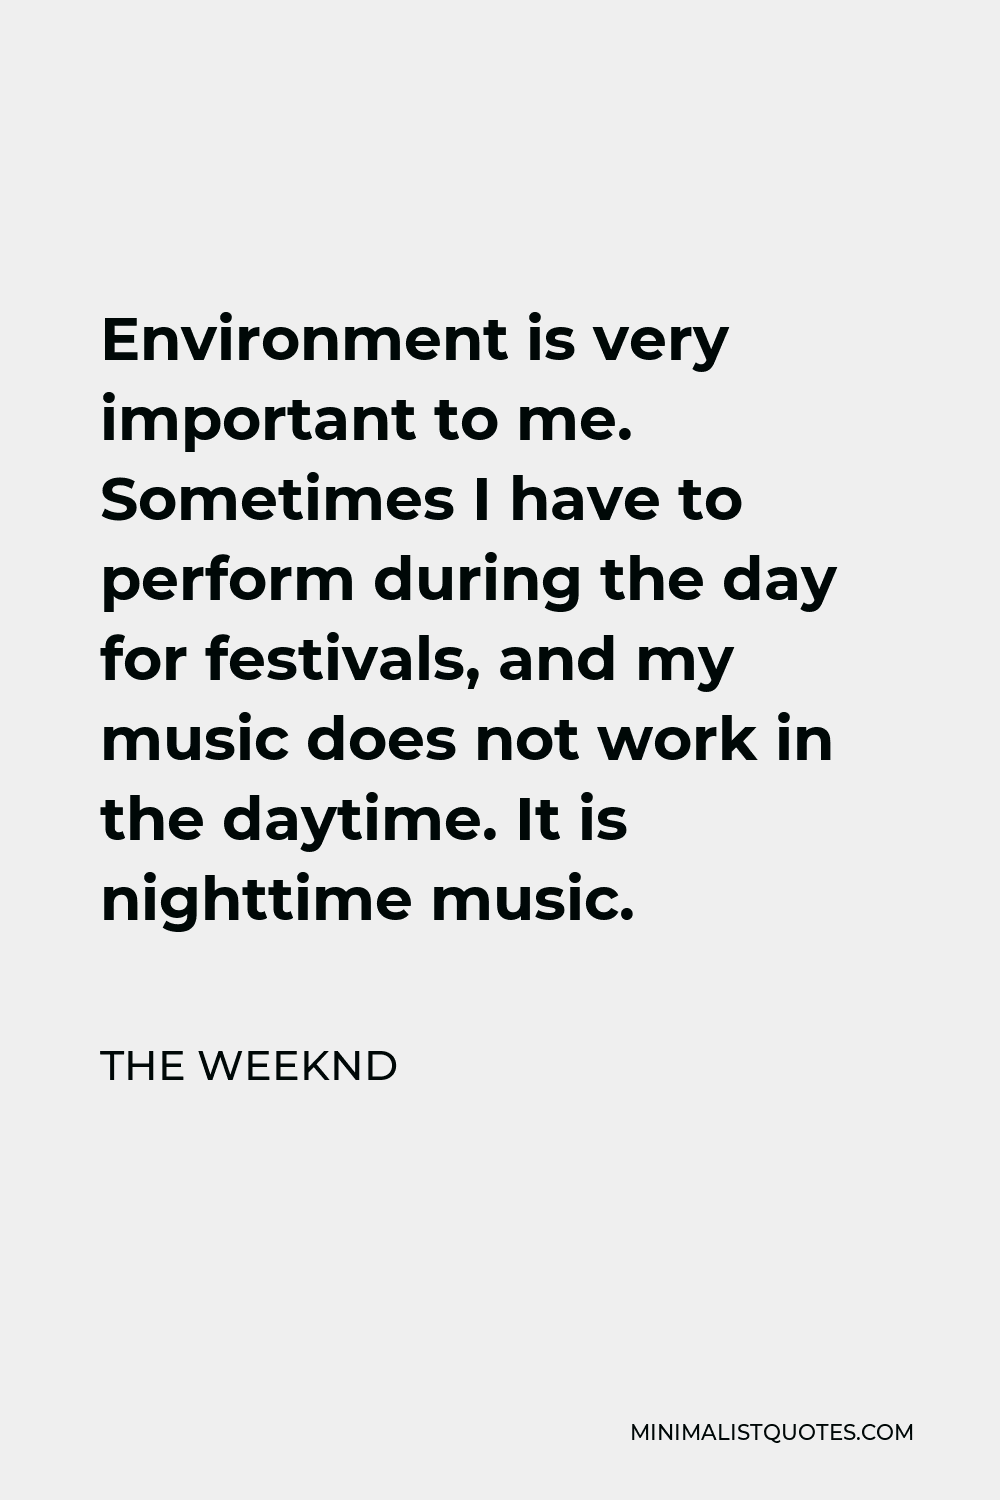 The Weeknd Quote - Environment is very important to me. Sometimes I have to perform during the day for festivals, and my music does not work in the daytime. It is nighttime music.